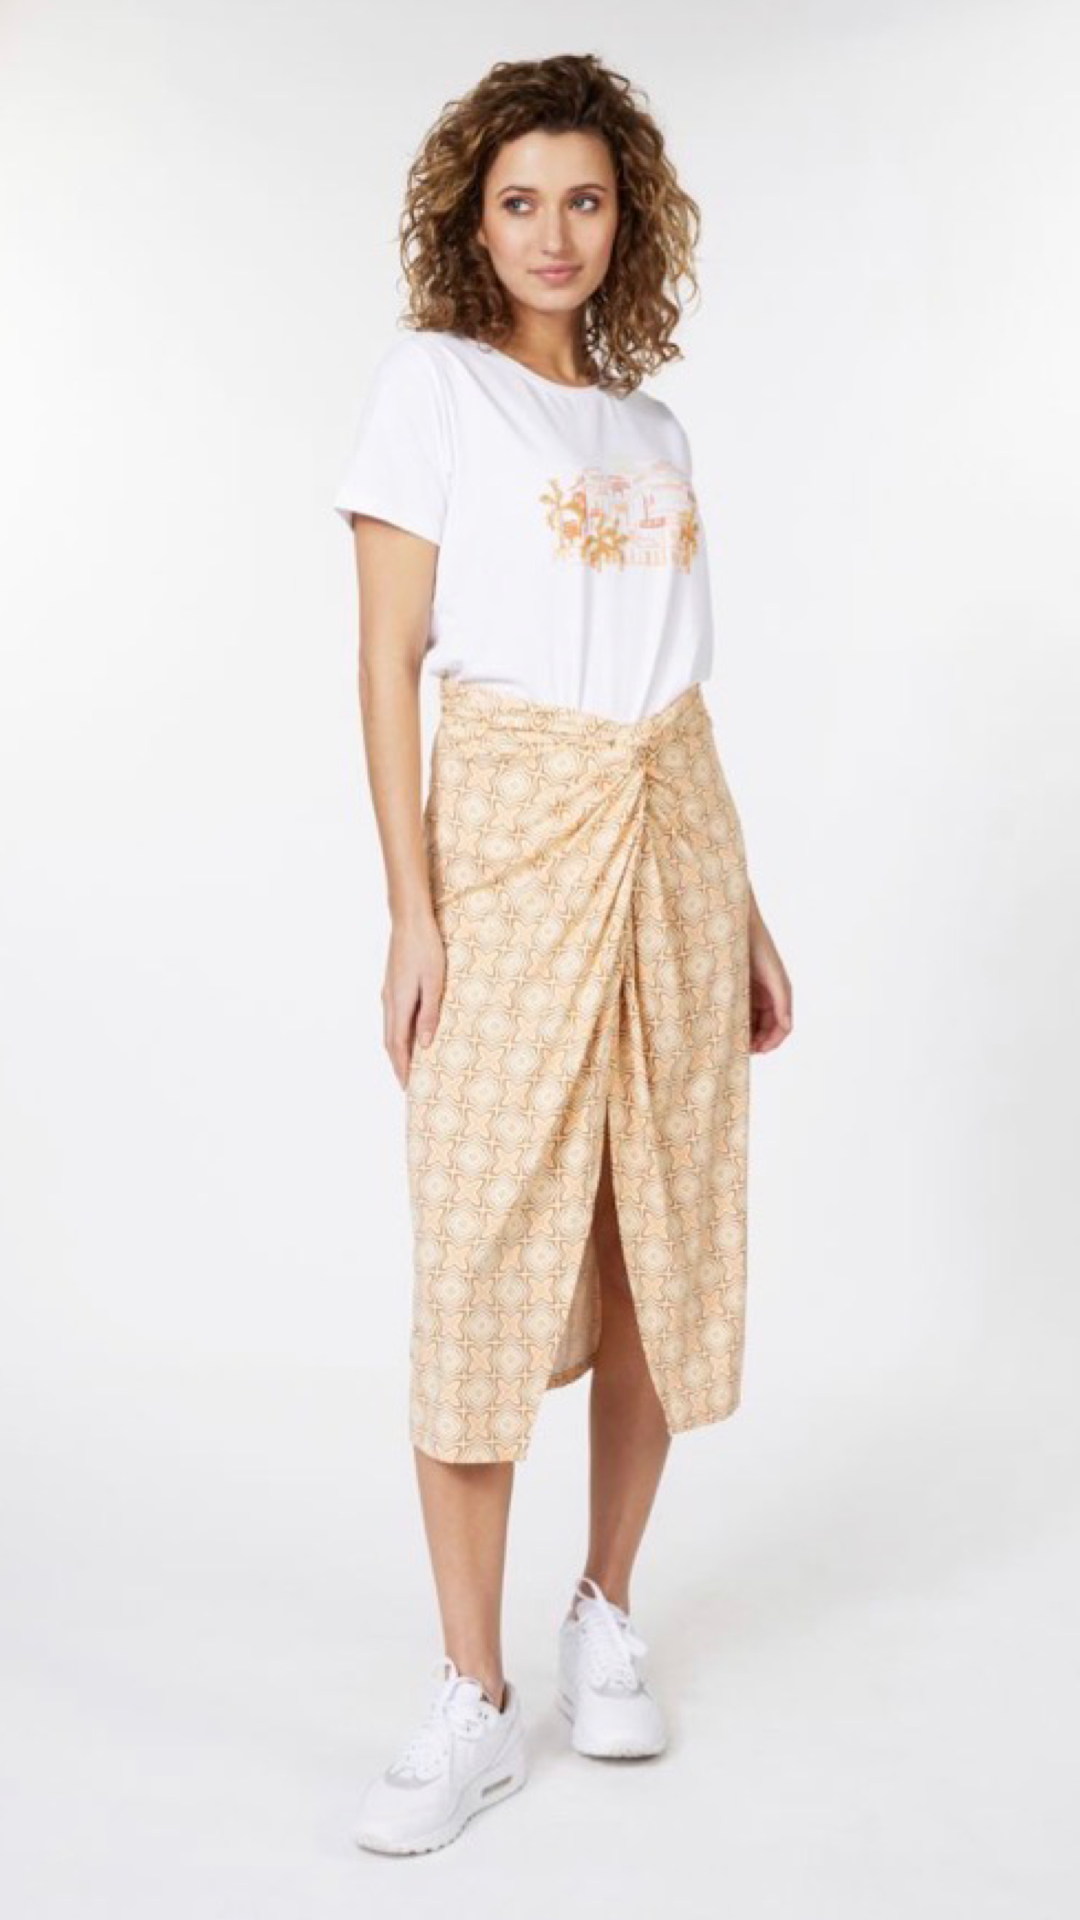 New Summer Skirt By Esqualo